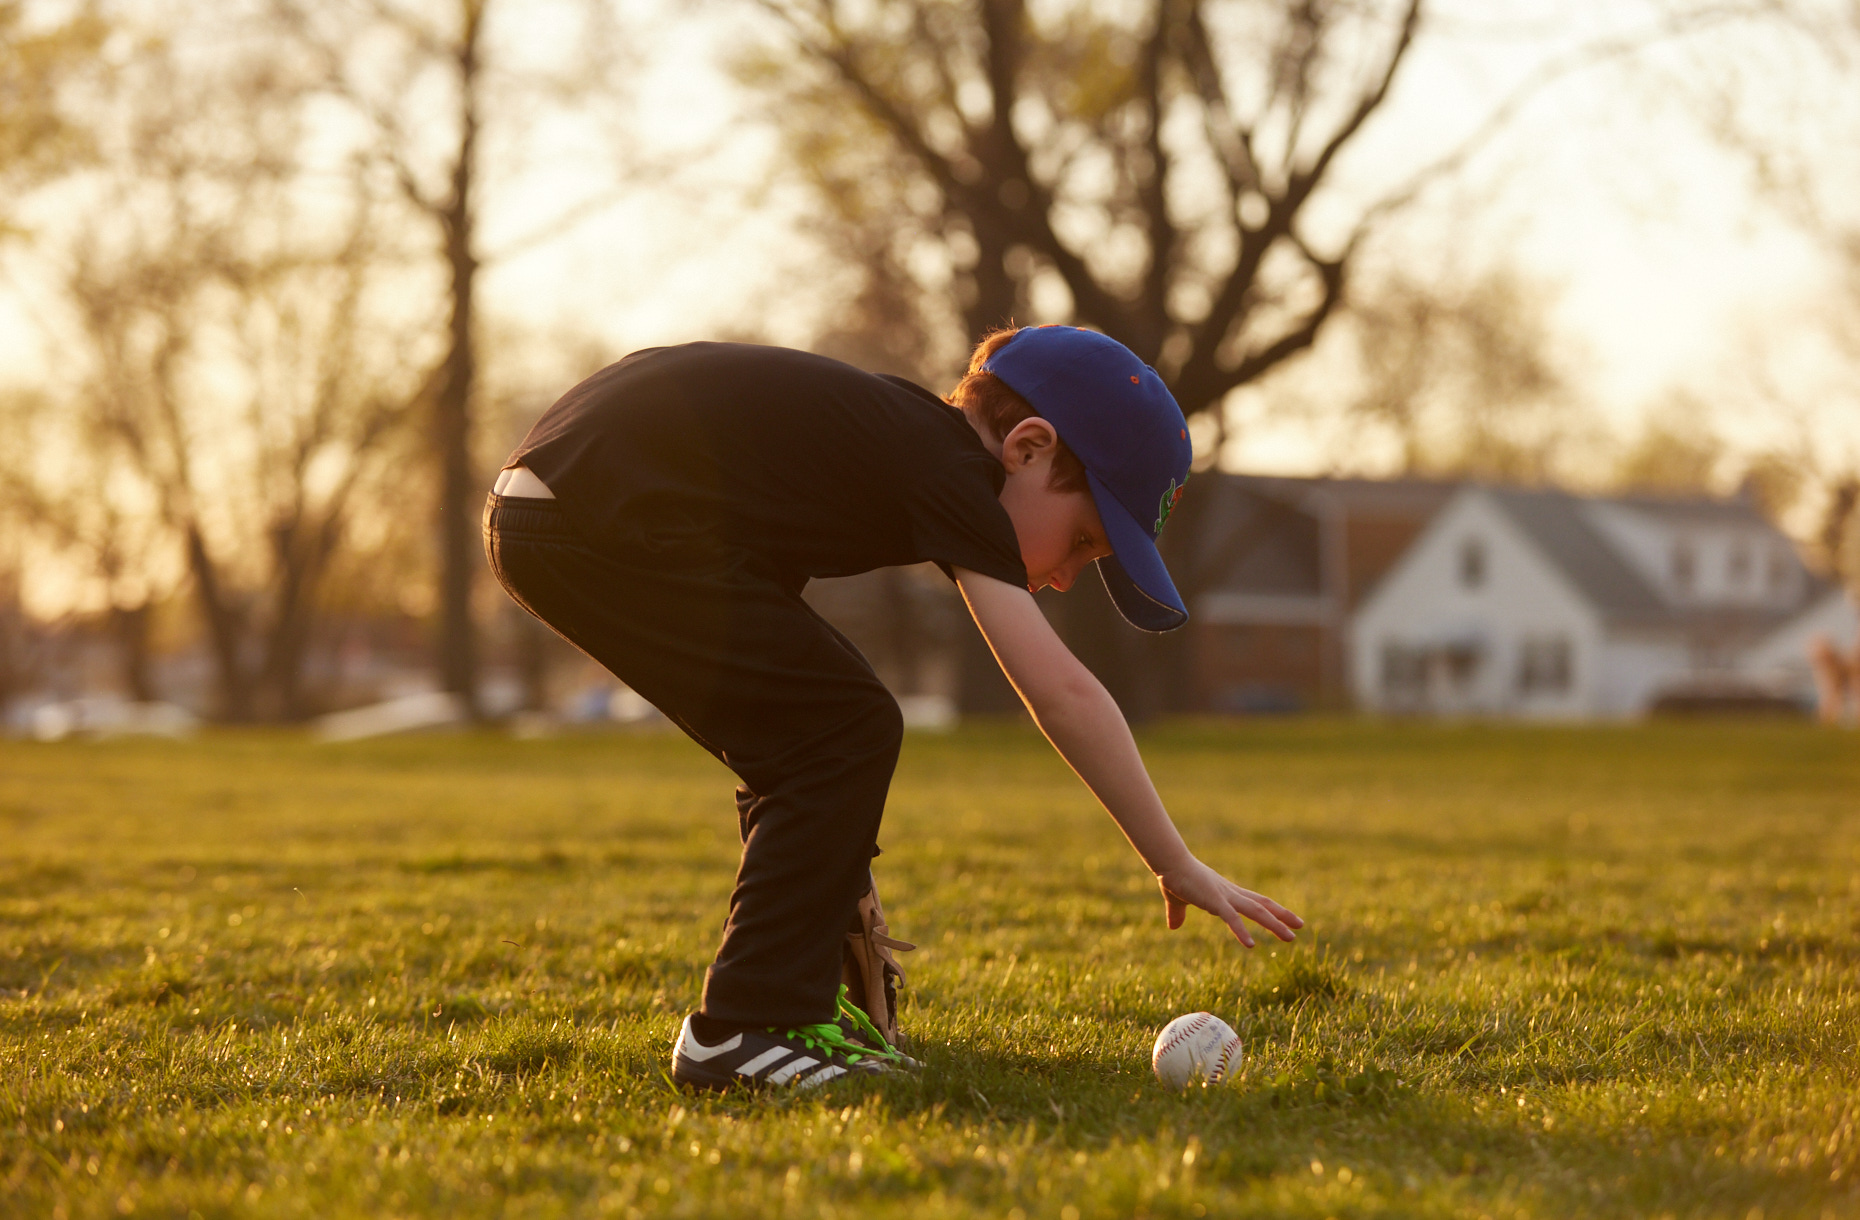 Boy picking up a baseball at sunset | Childrens photography by Saverio Truglia